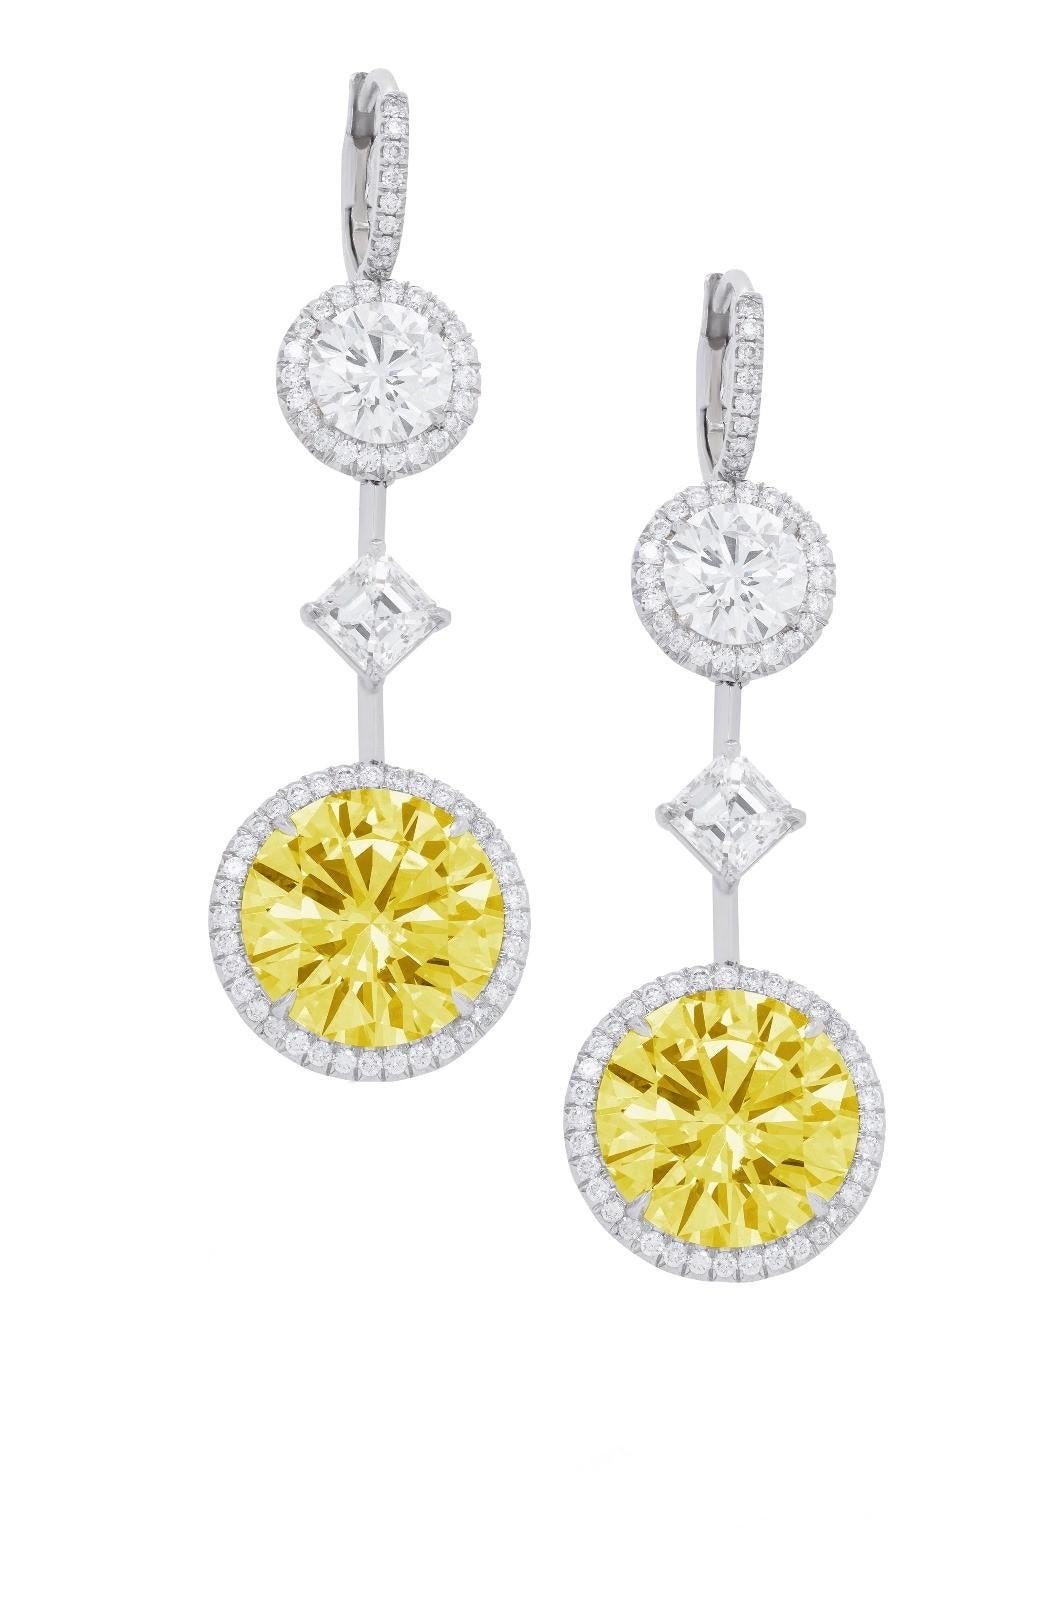 Diana M. Fancy Intense Yellow Diamonds 21.57ct Rounds VS GIA Natural Platinum  In New Condition For Sale In New York, NY